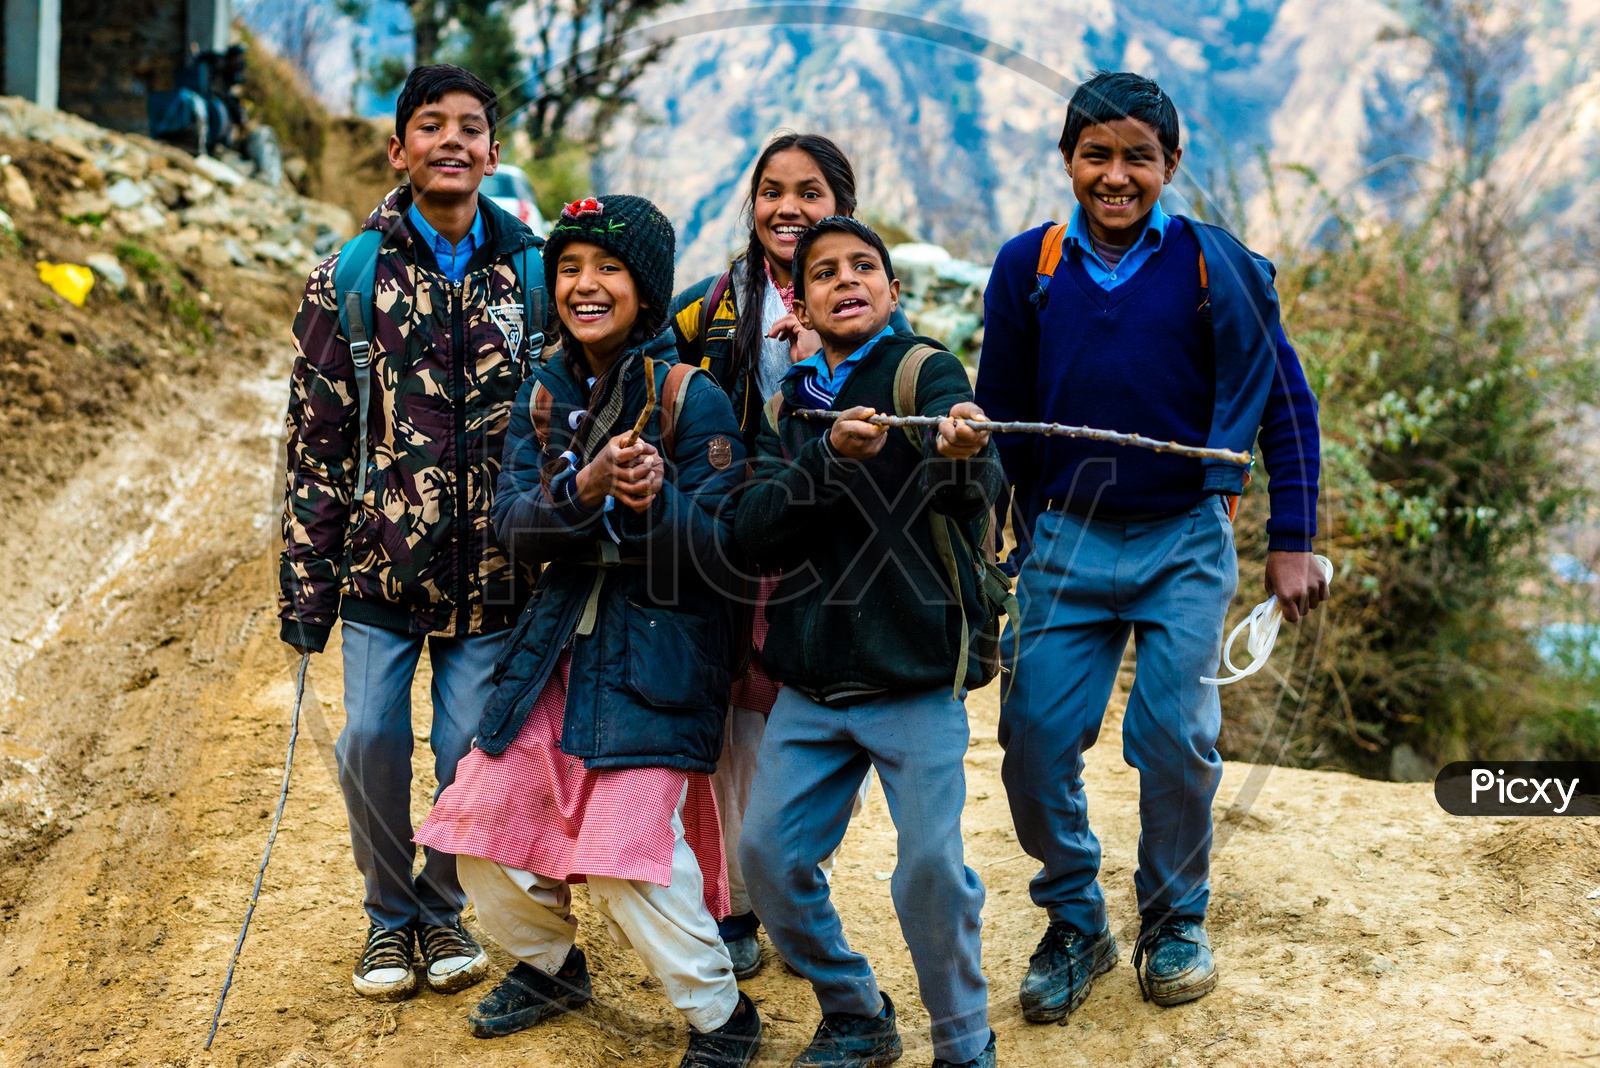 Himachali School Kids Smiling and Posing on the Street